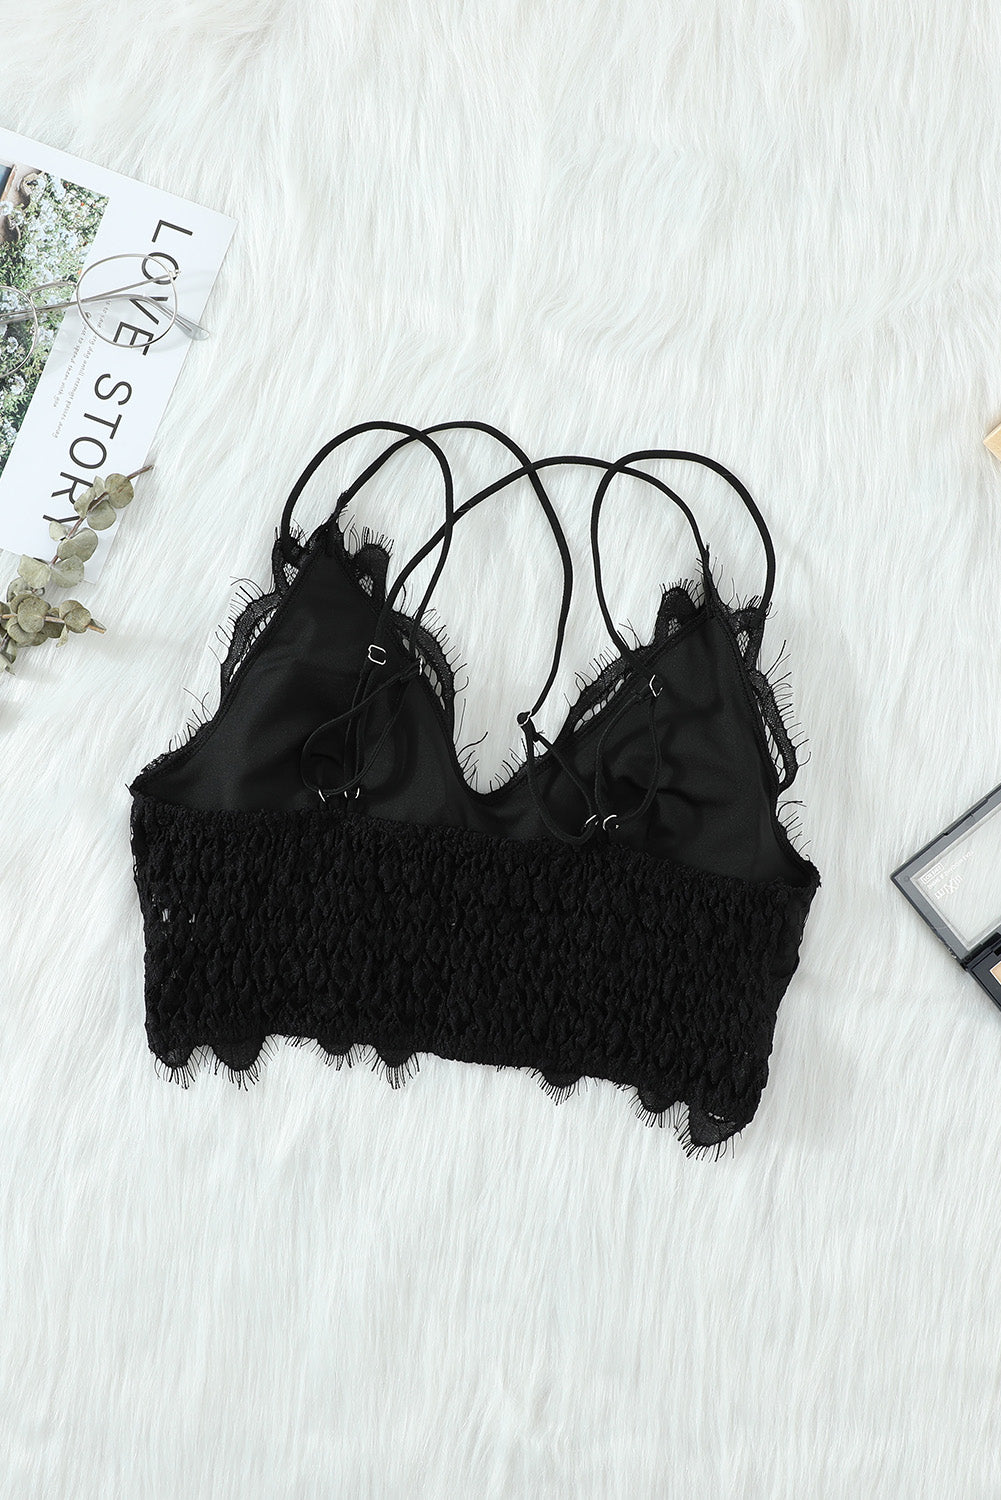 Chic Black Lace Bralette with Lining